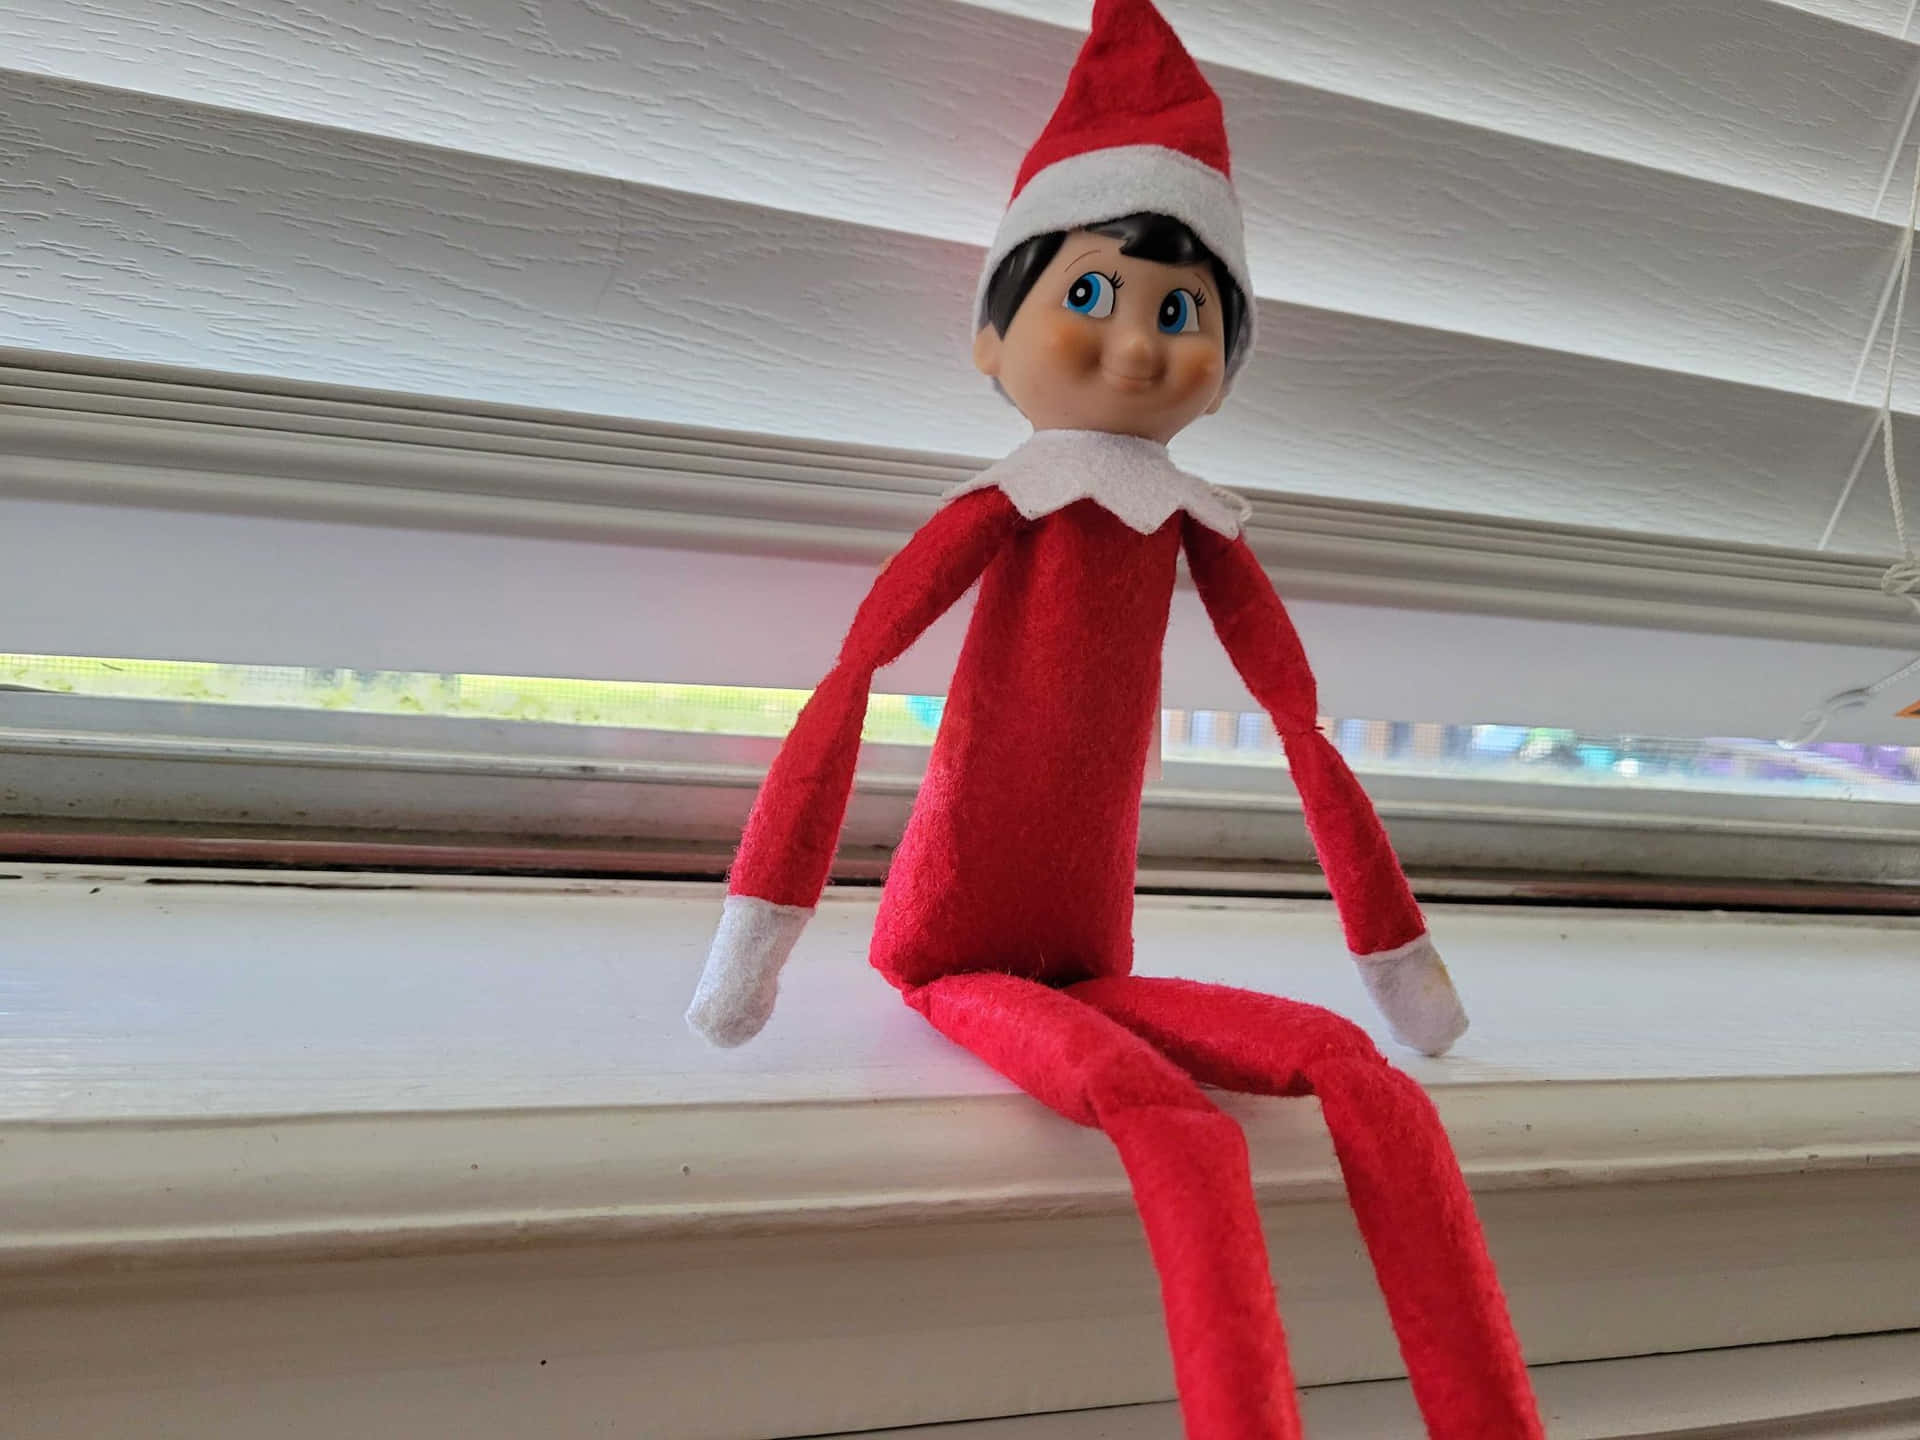 Join the fun this holiday season with an Elf On The Shelf!